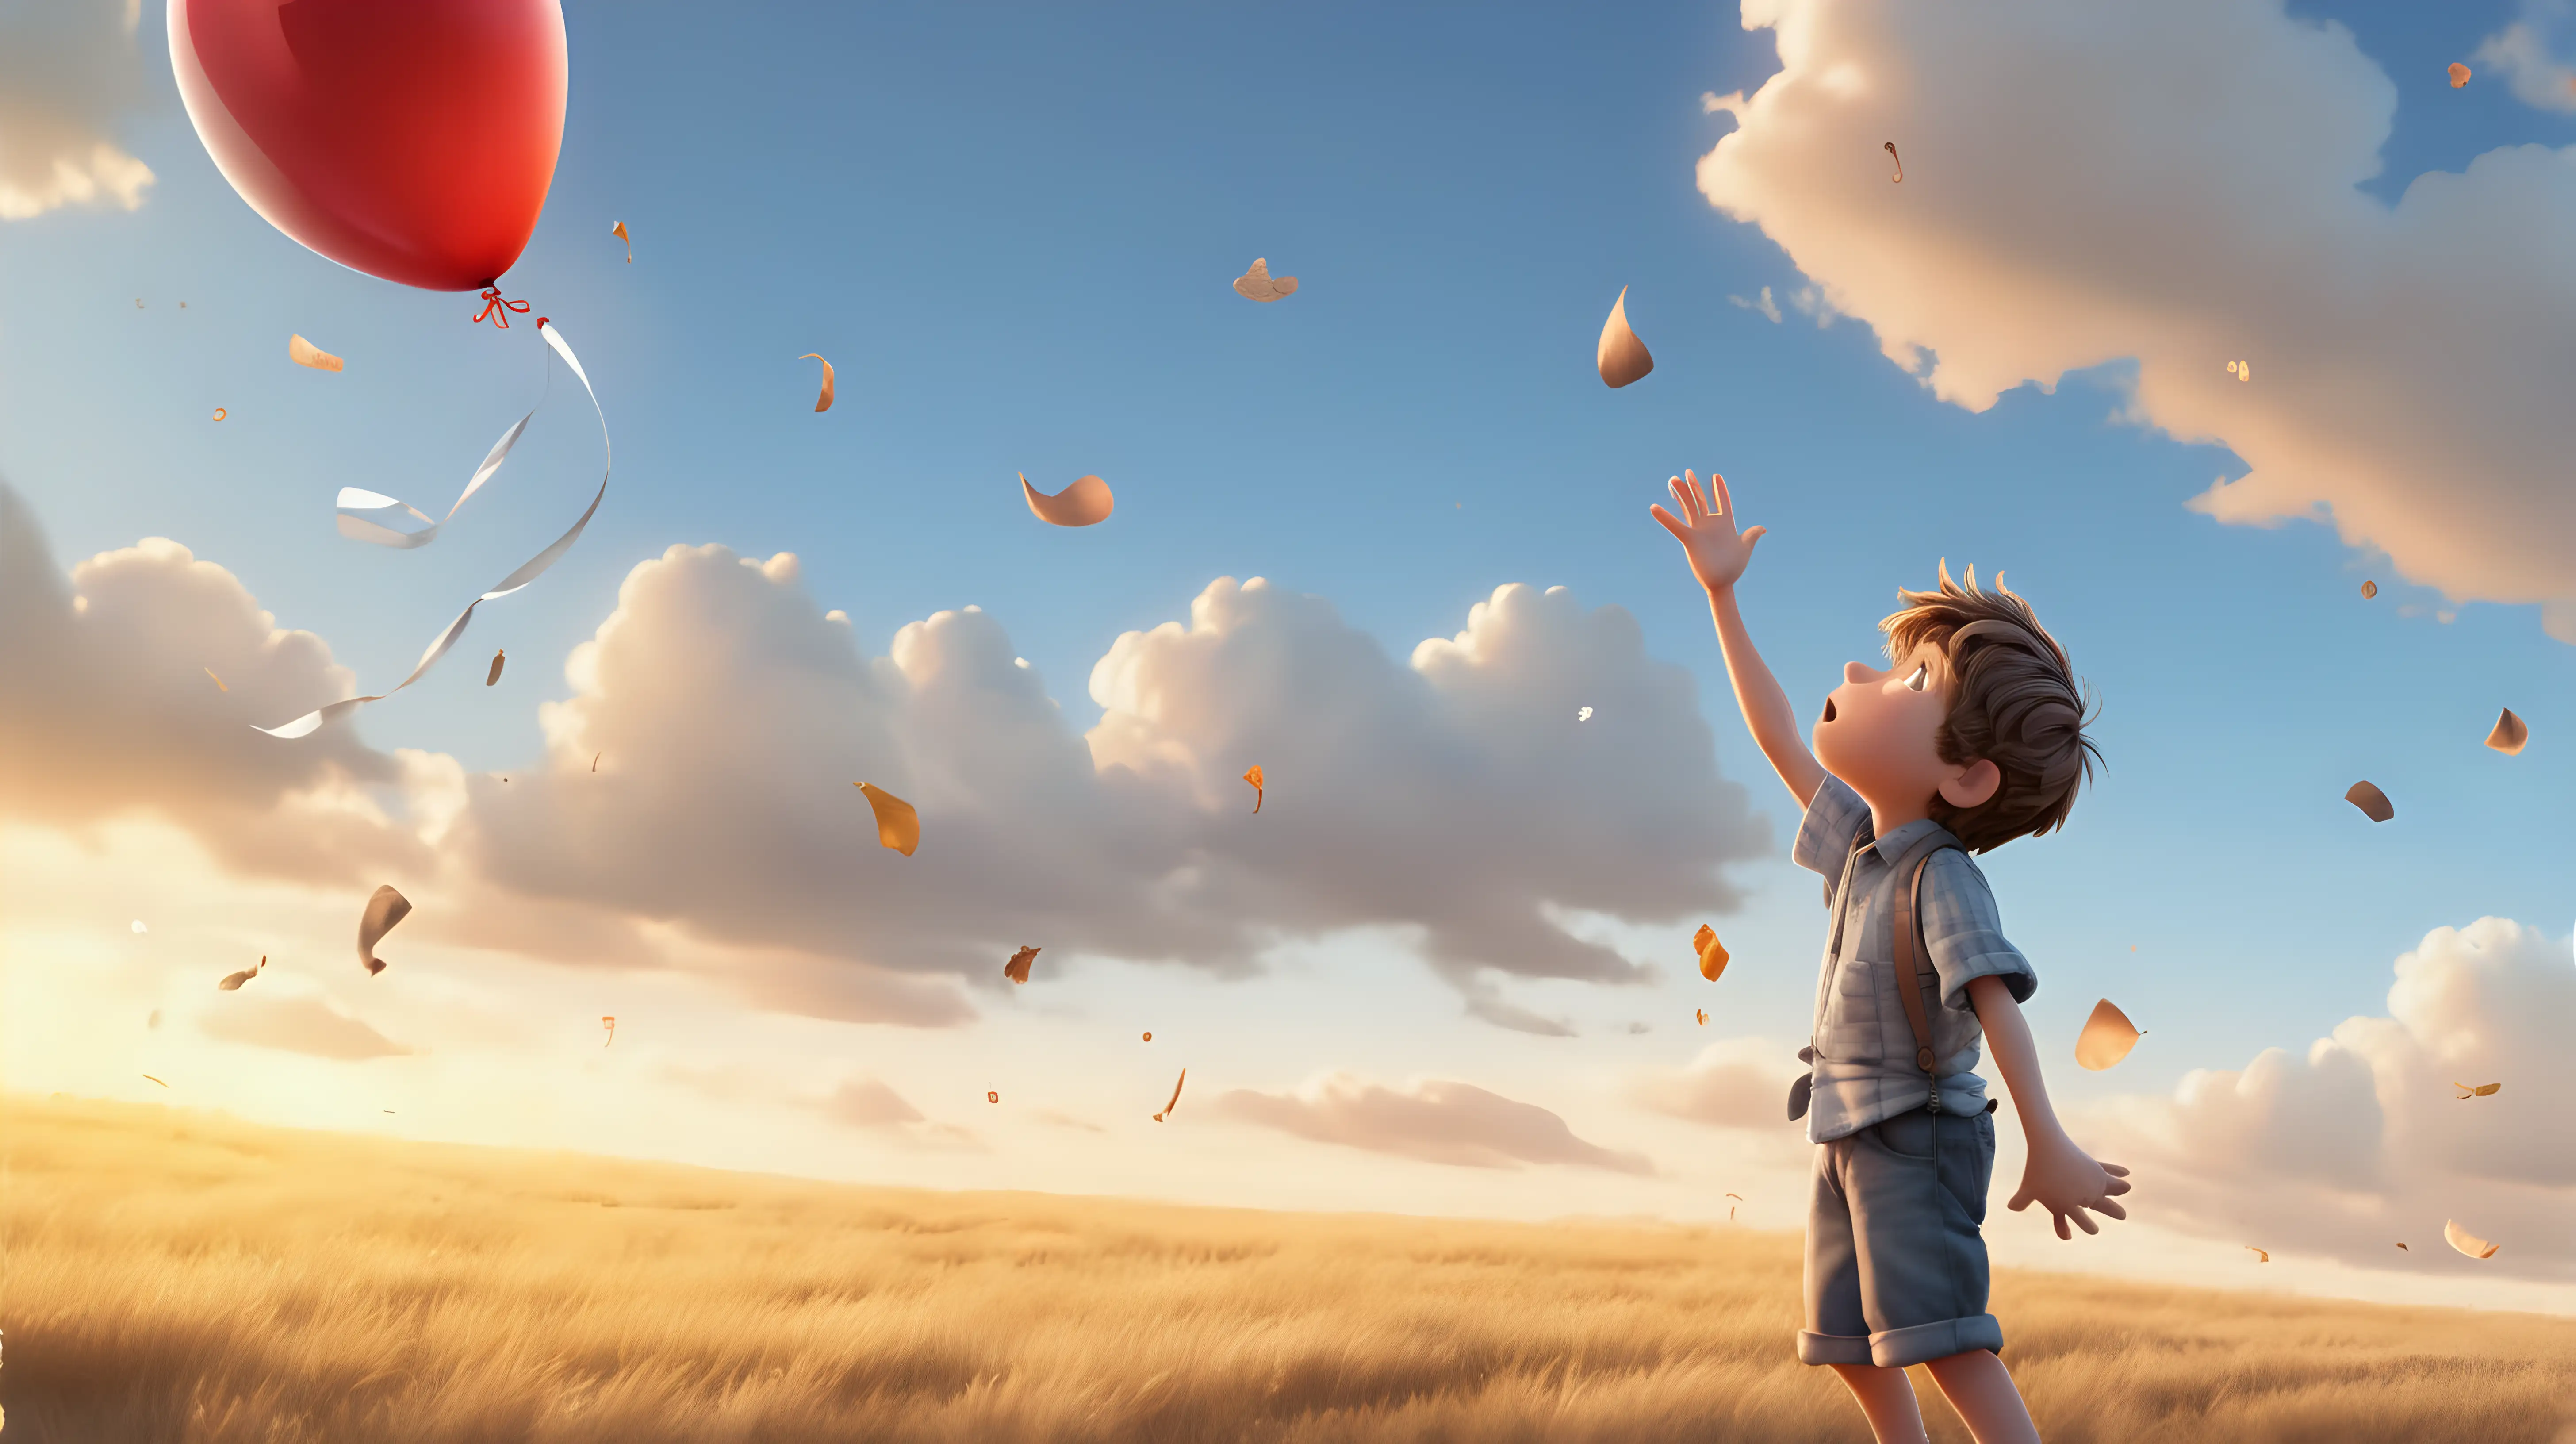 A beautiful scene of a charming animated boy releasing a deflated balloon into the sky, symbolizing lost dreams.